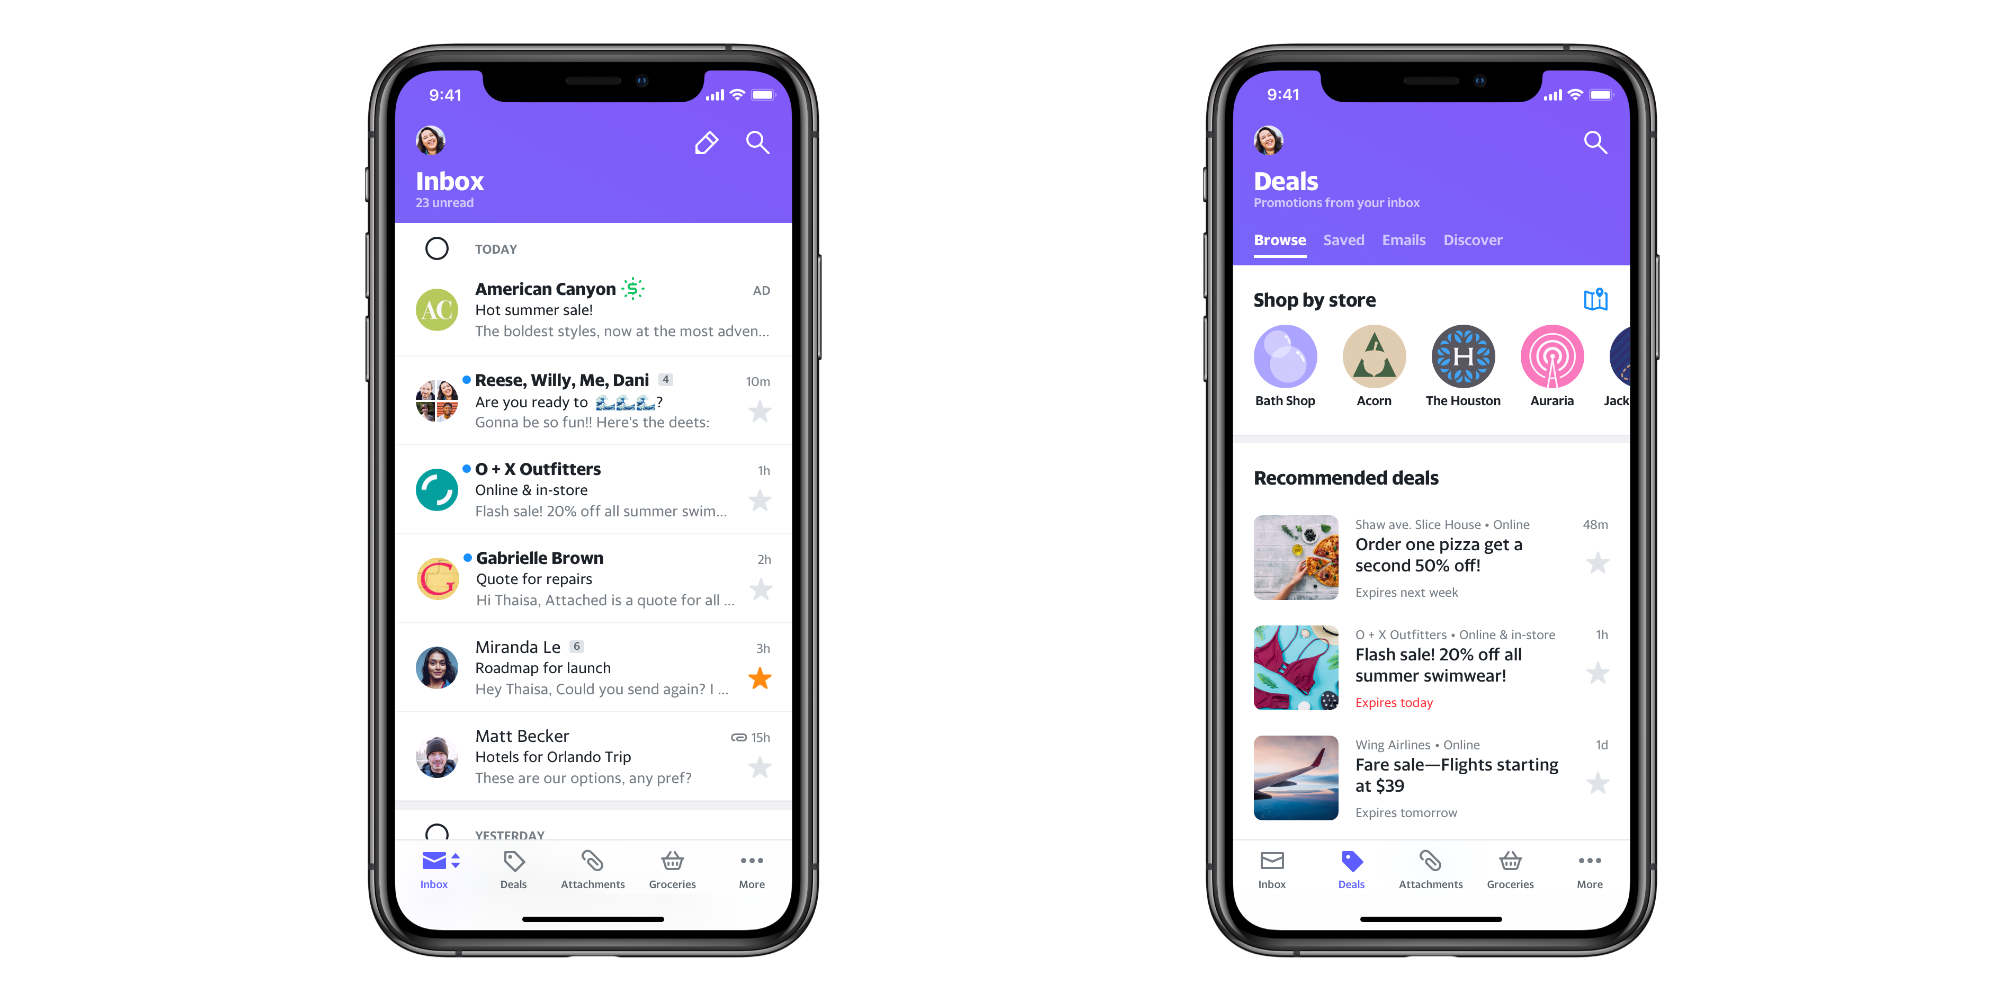 Yahoo mobile version with different views